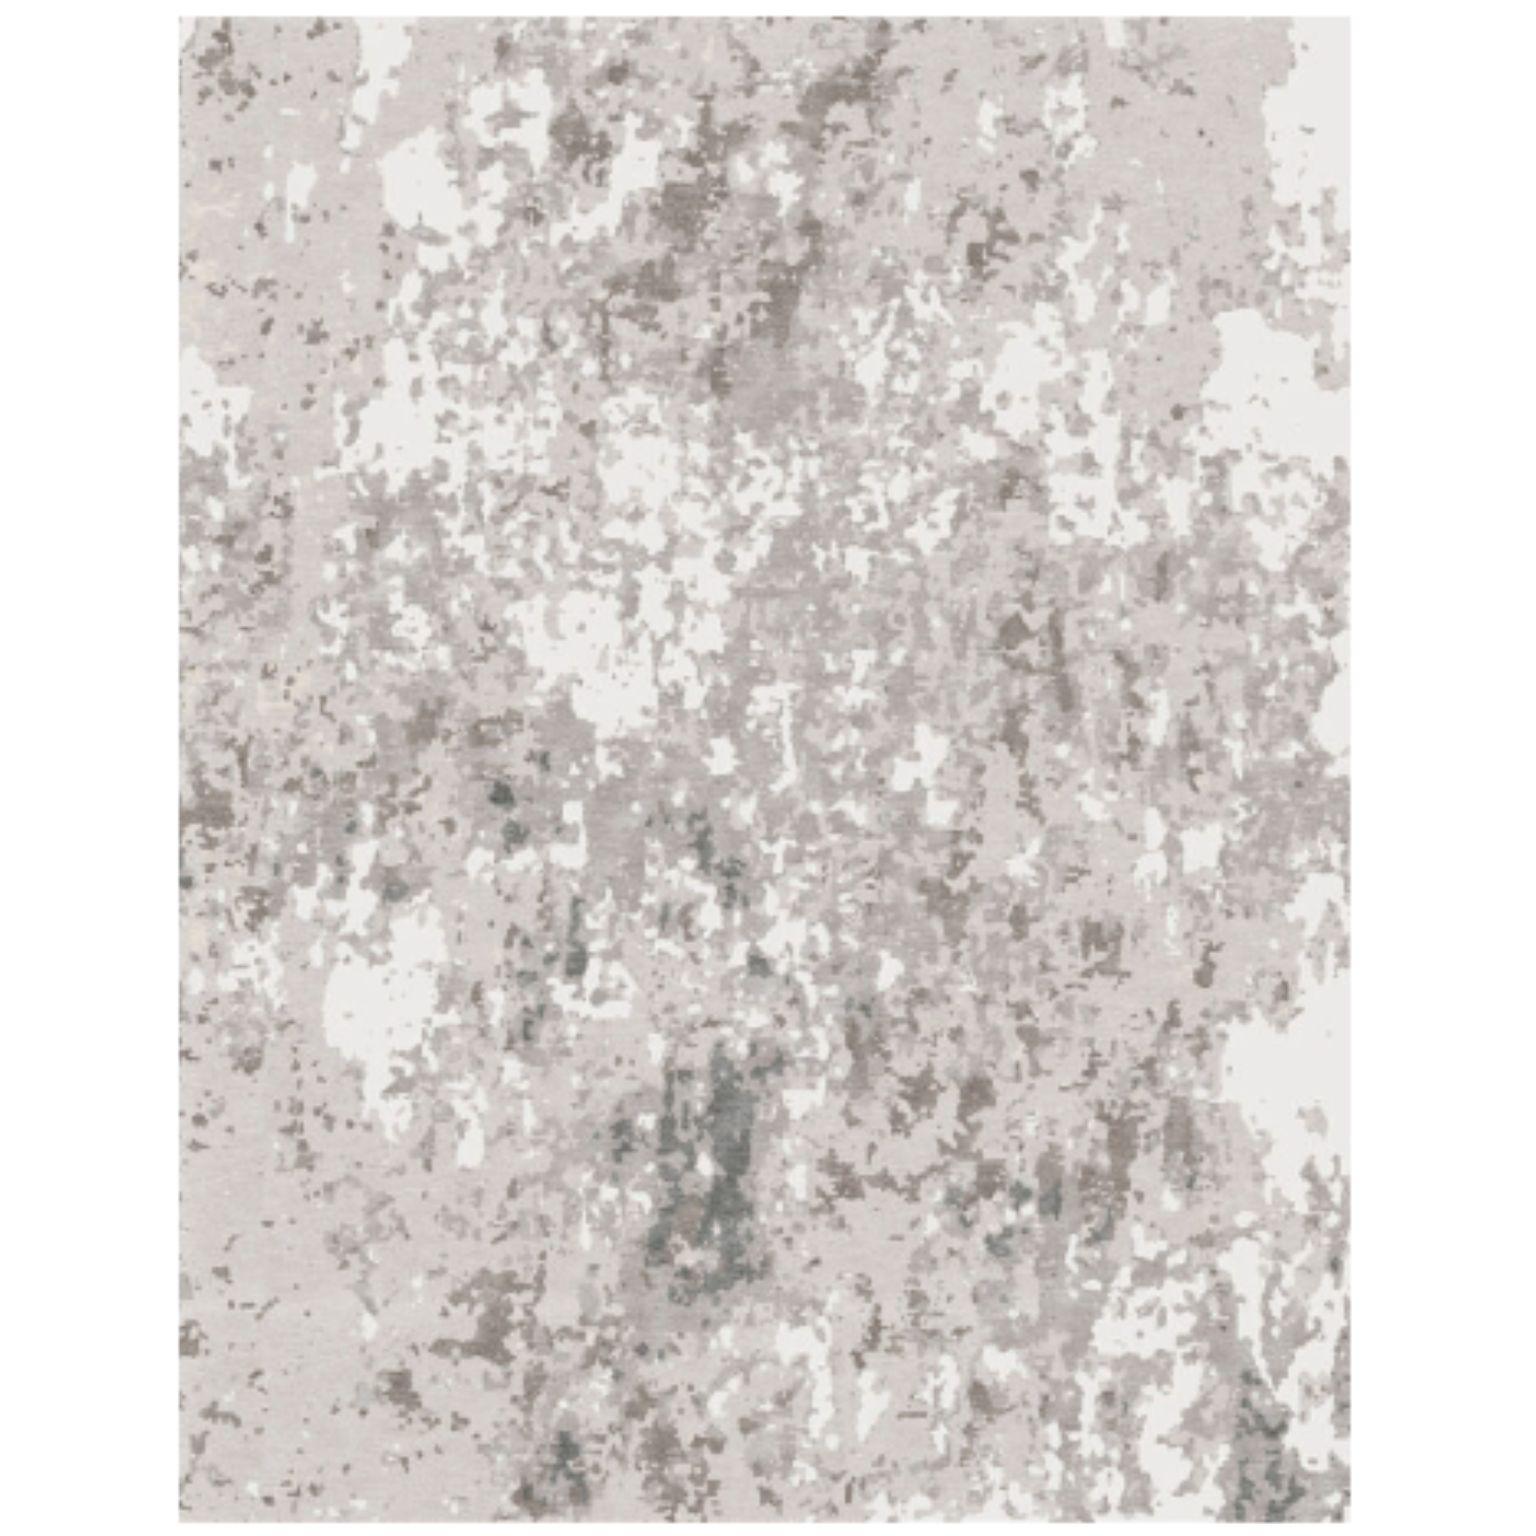 RUSKIN 200 rug by Illulian
Dimensions: D300 x H200 cm 
Materials: Wool 50% , Silk 50%
Variations available and prices may vary according to materials and sizes. 

Illulian, historic and prestigious rug company brand, internationally renowned in